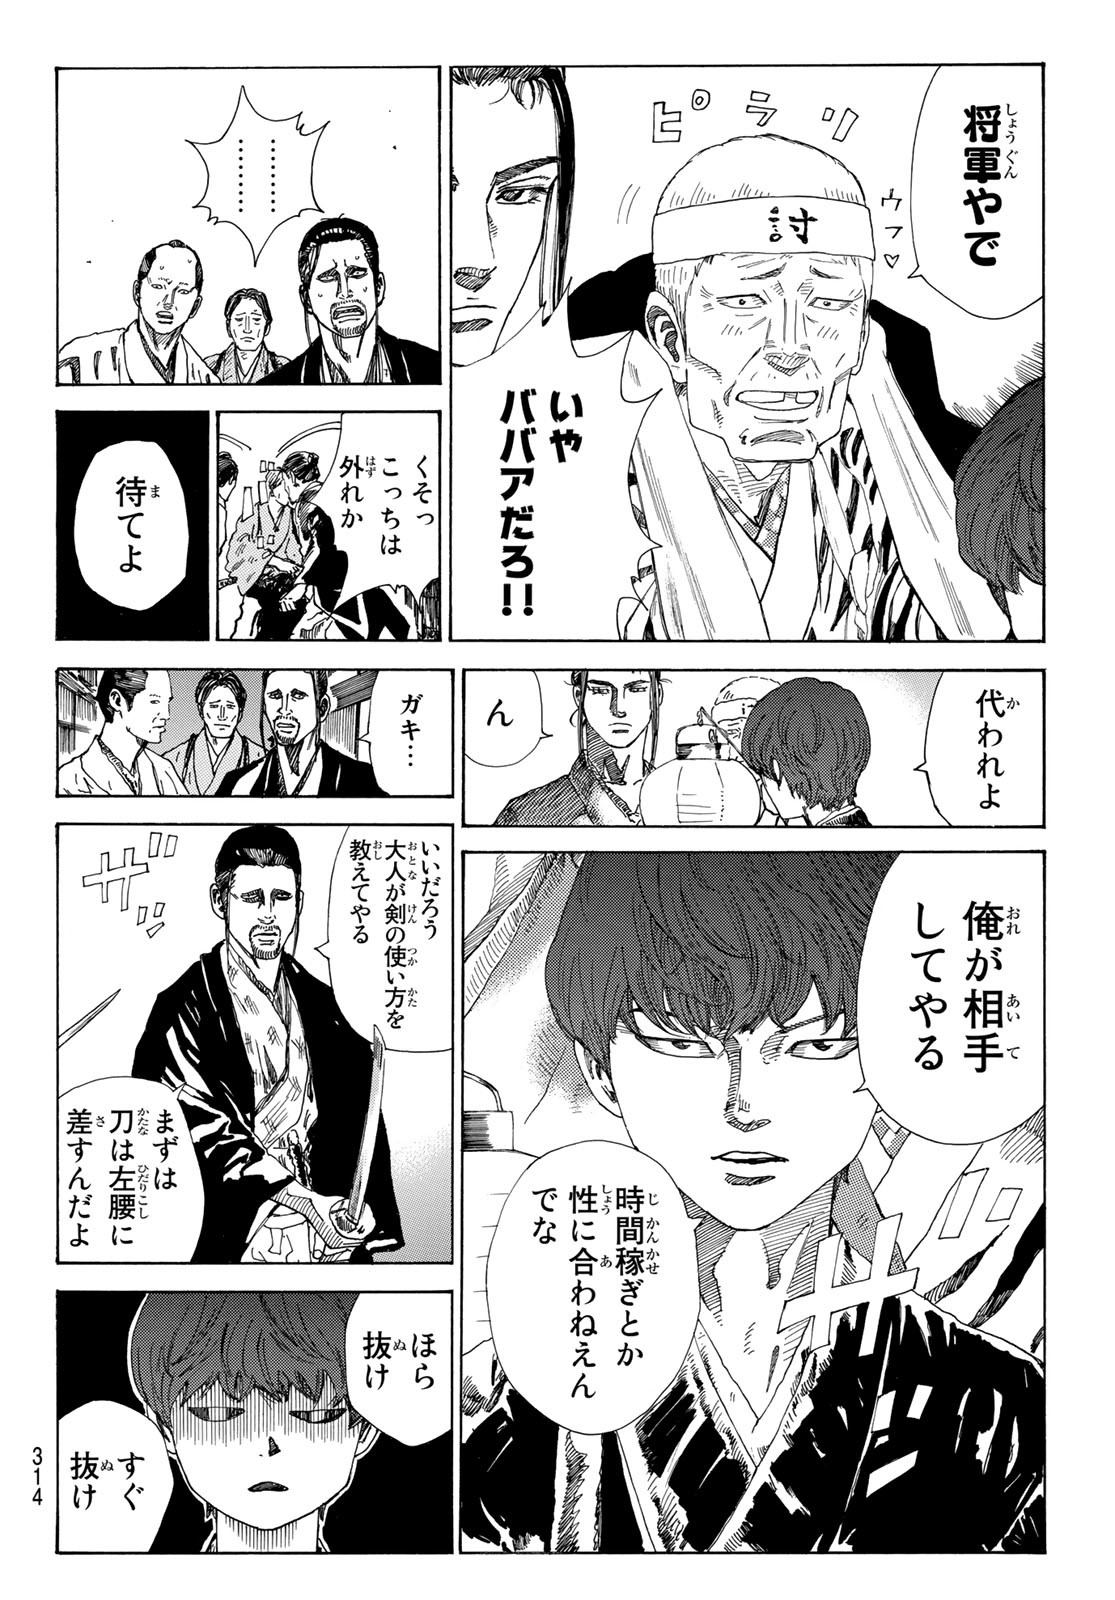 An Mo Miburo 第31話 - Page 4